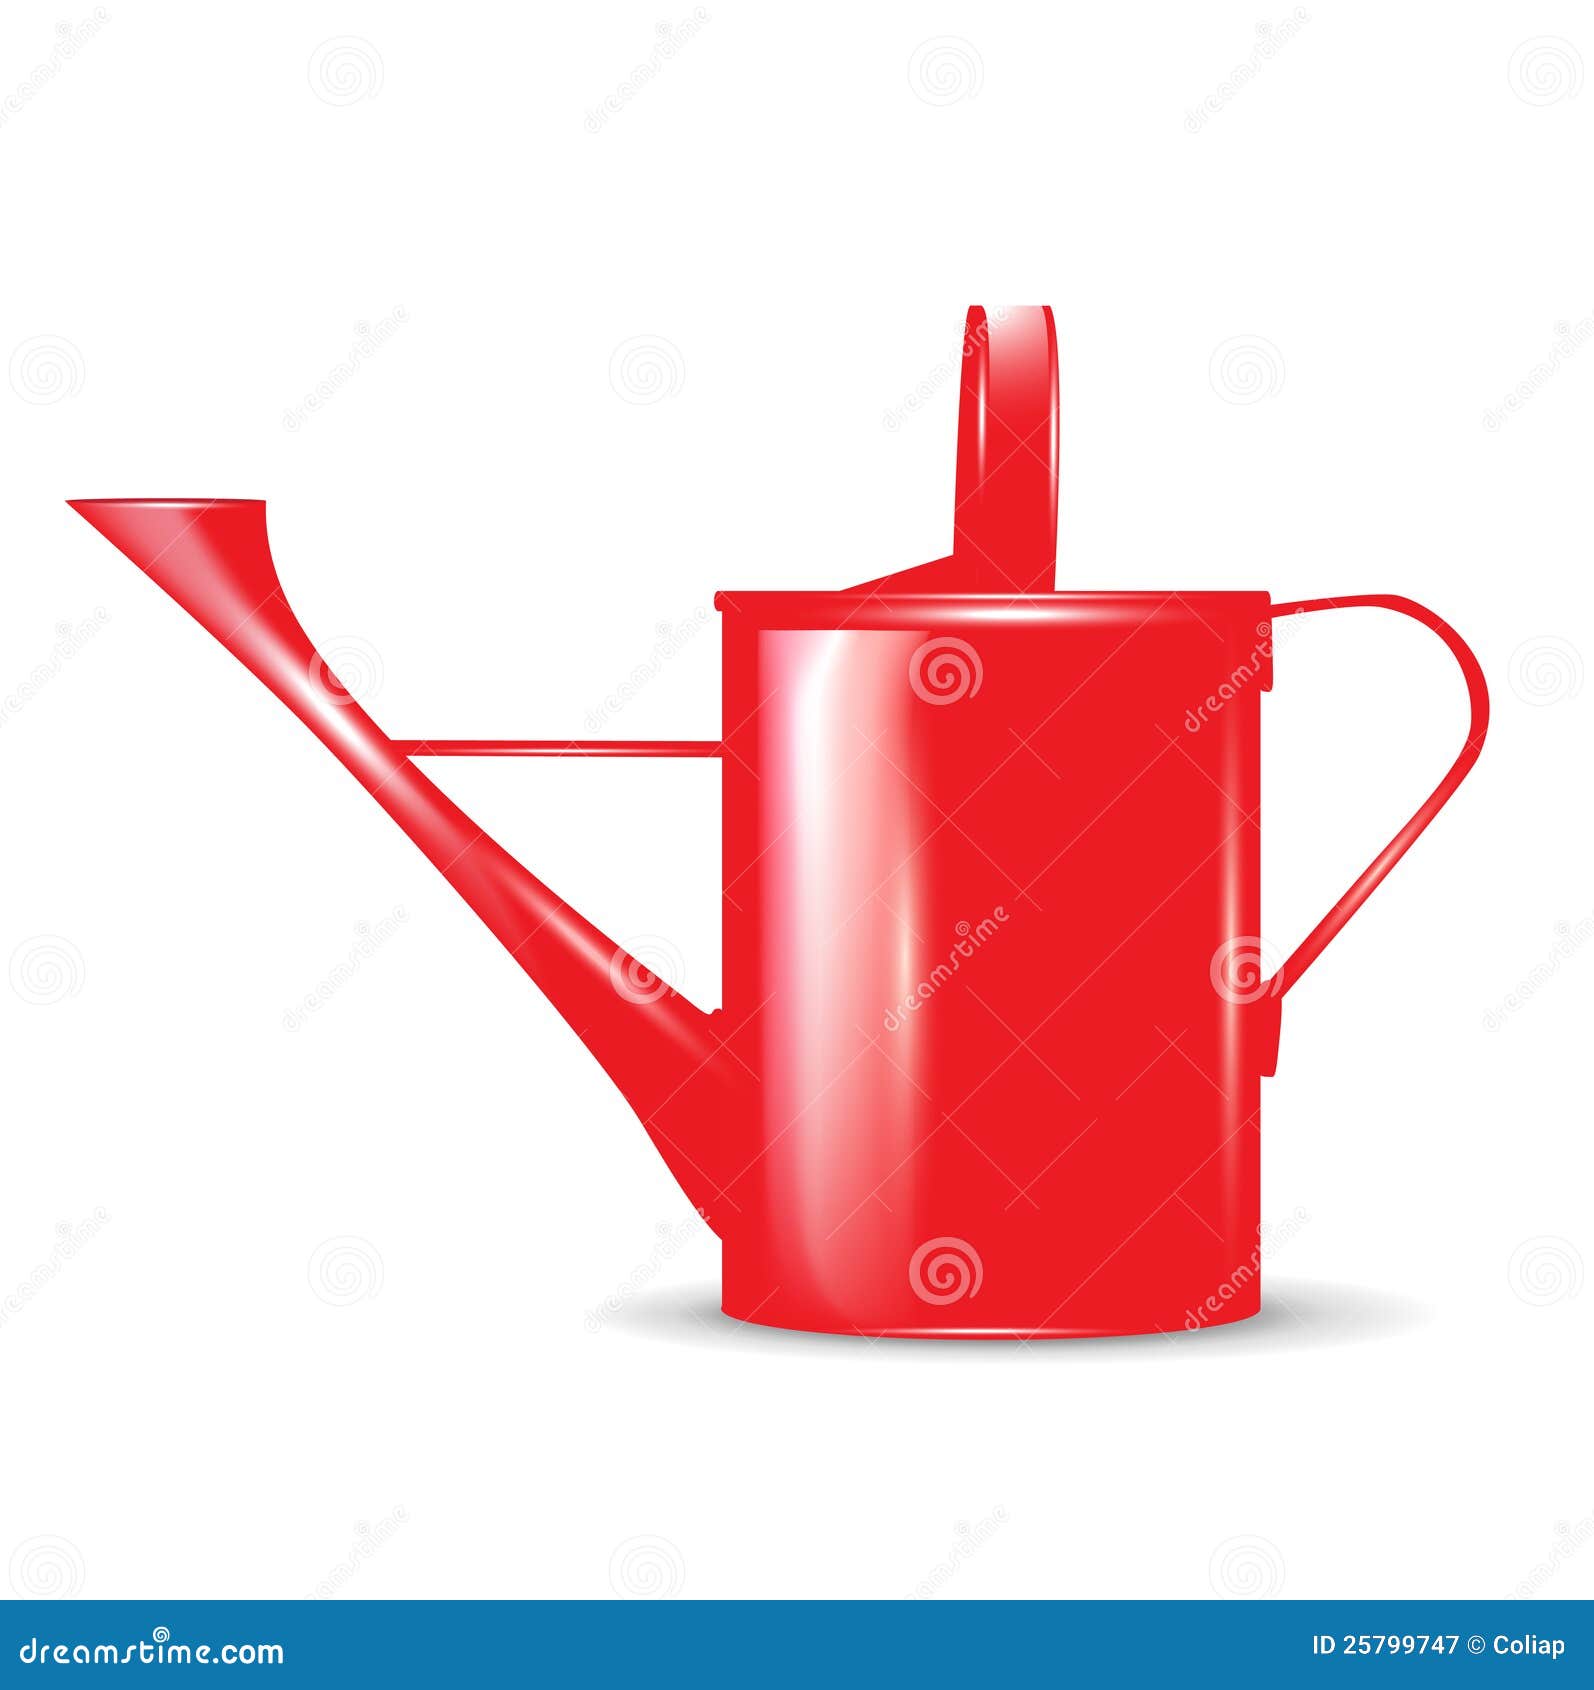 Single red watering can stock vector. Illustration of flower - 25799747